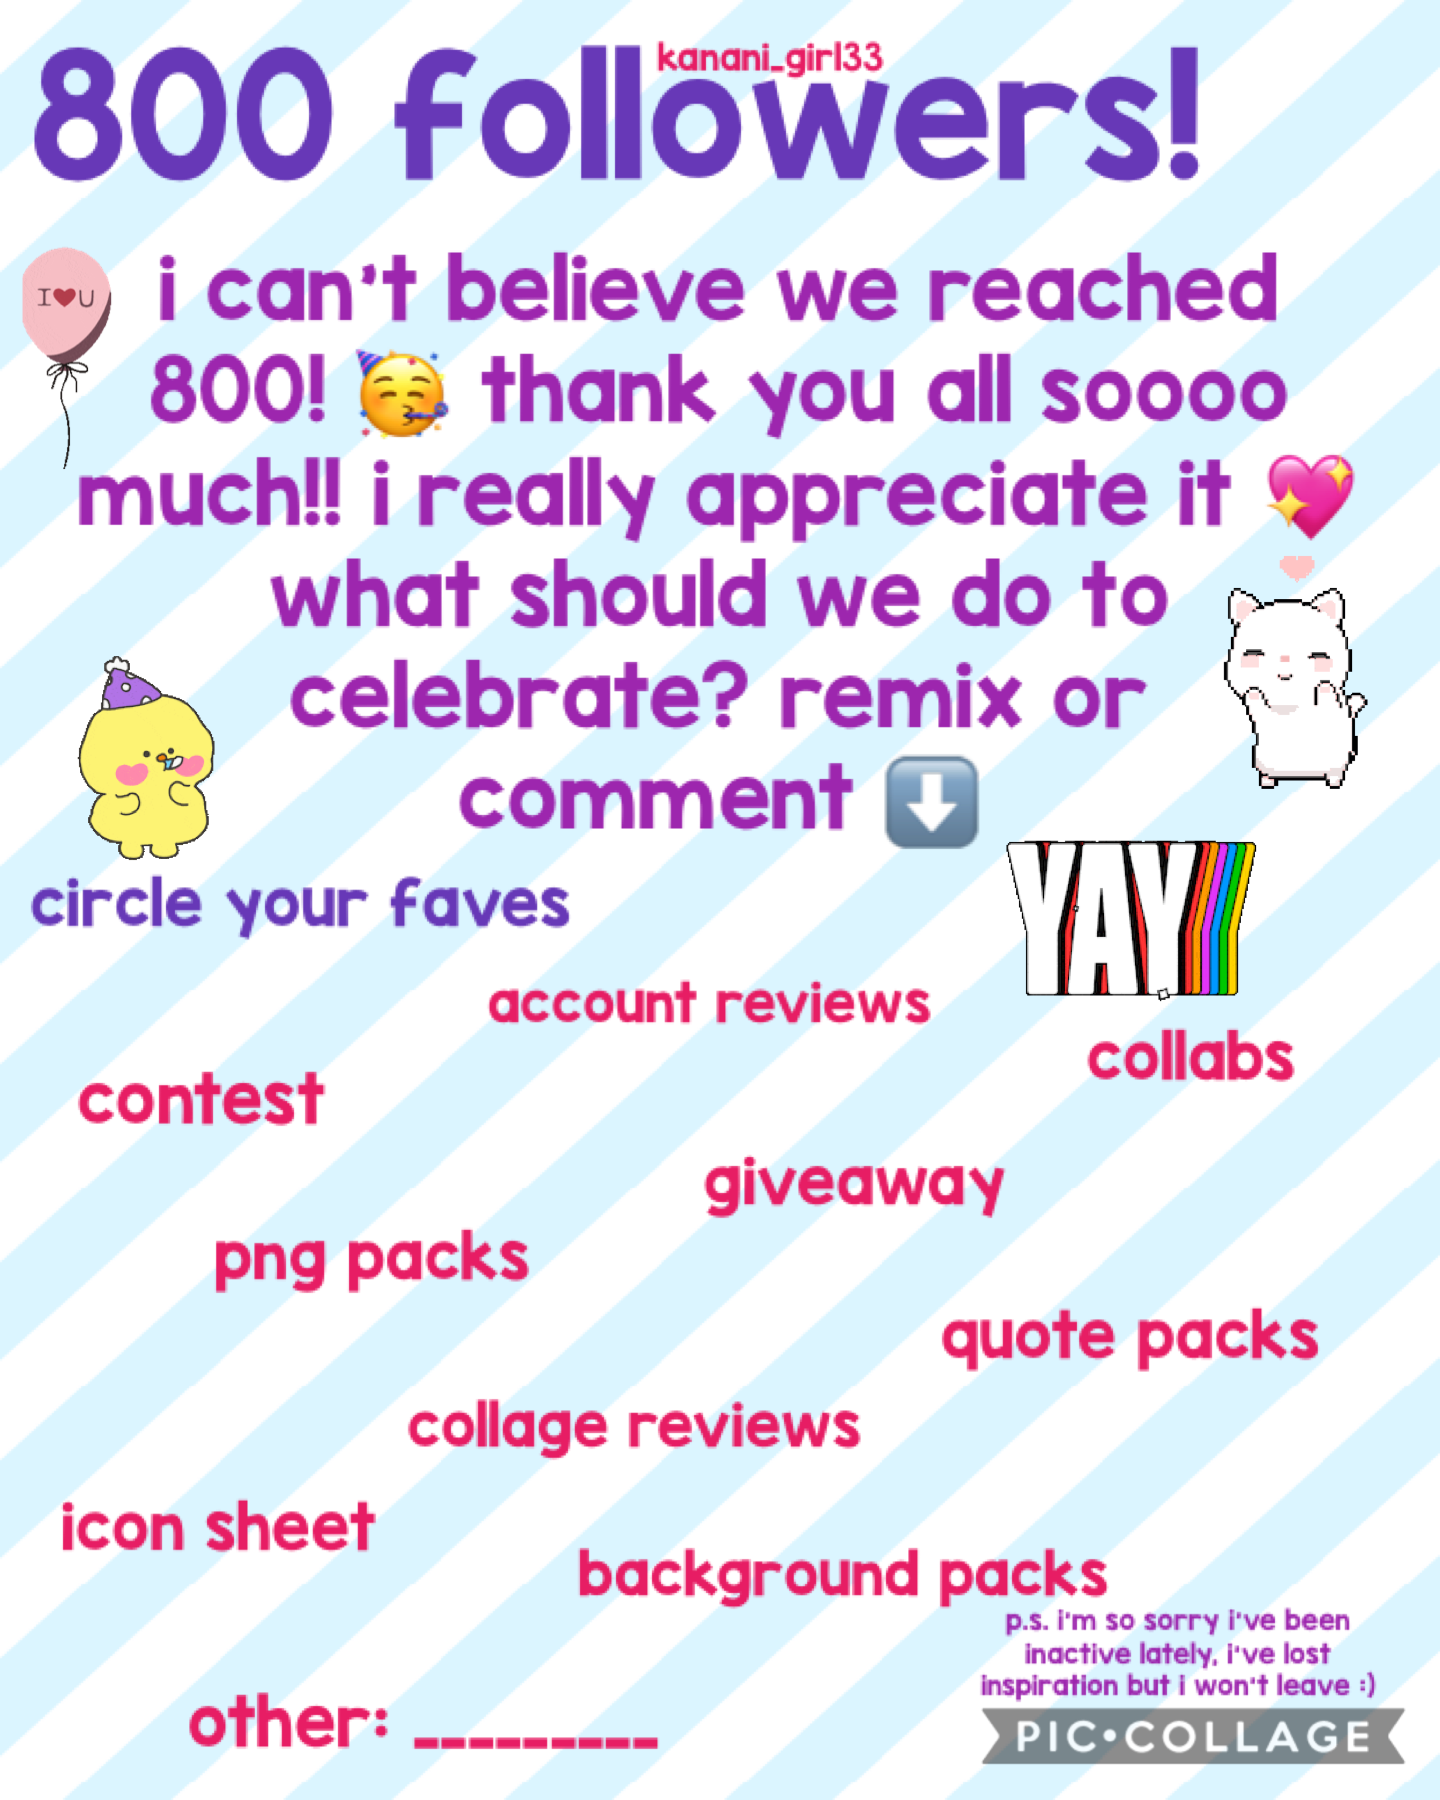 WE REACHED 800!!! (tap)
Thank you all so so much i love each and every one of you guys 💖💖 remix or comment celebration ideas! June 21, 2020